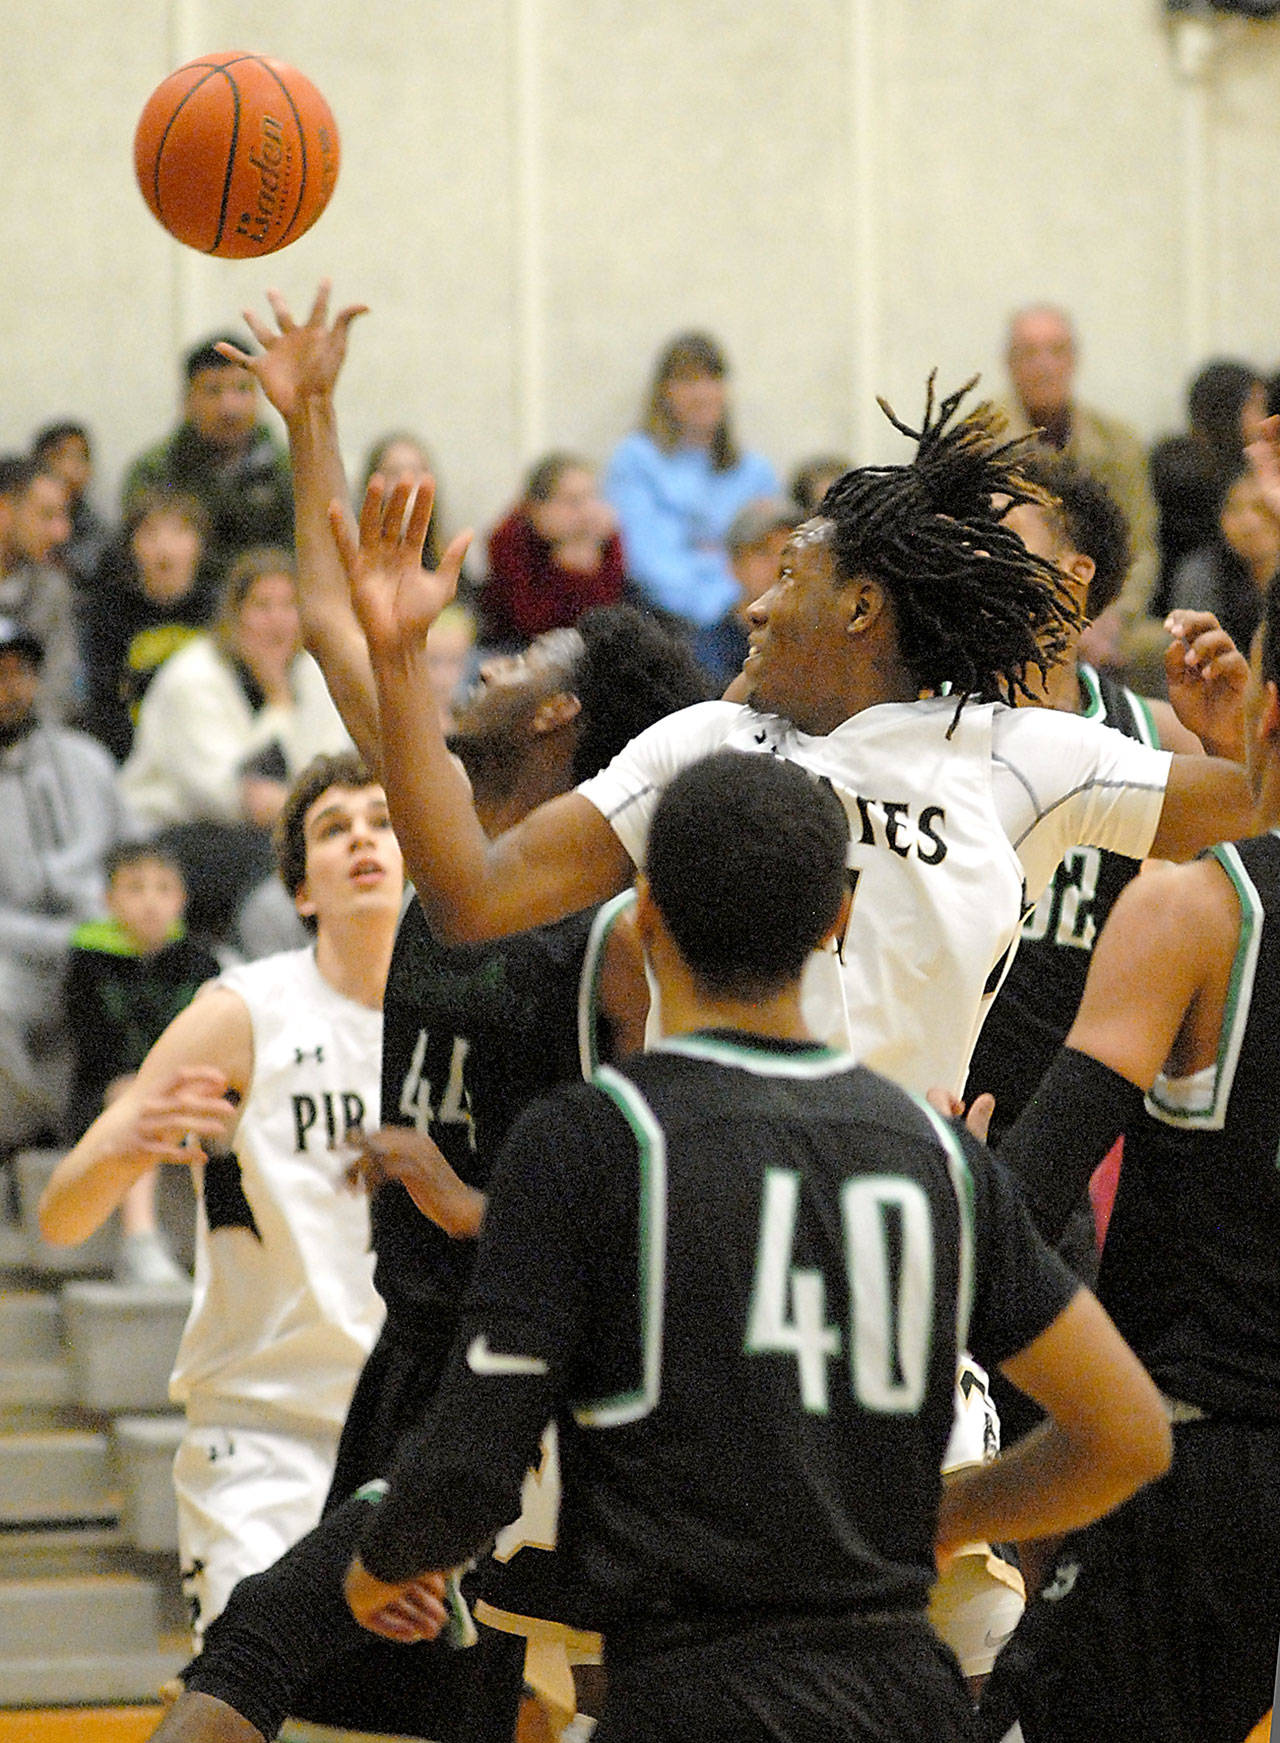 Keith Thorpe/Peninsula Daily News Peninsula’s Malik Moore, center, vies for a rebound with Shoreline’s Dawit Nuguse on Wednesday night in Port Angeles, Looking are Peninsula’s Luke Angevine, left, and Shoreline’s Keilyn Myers, front.